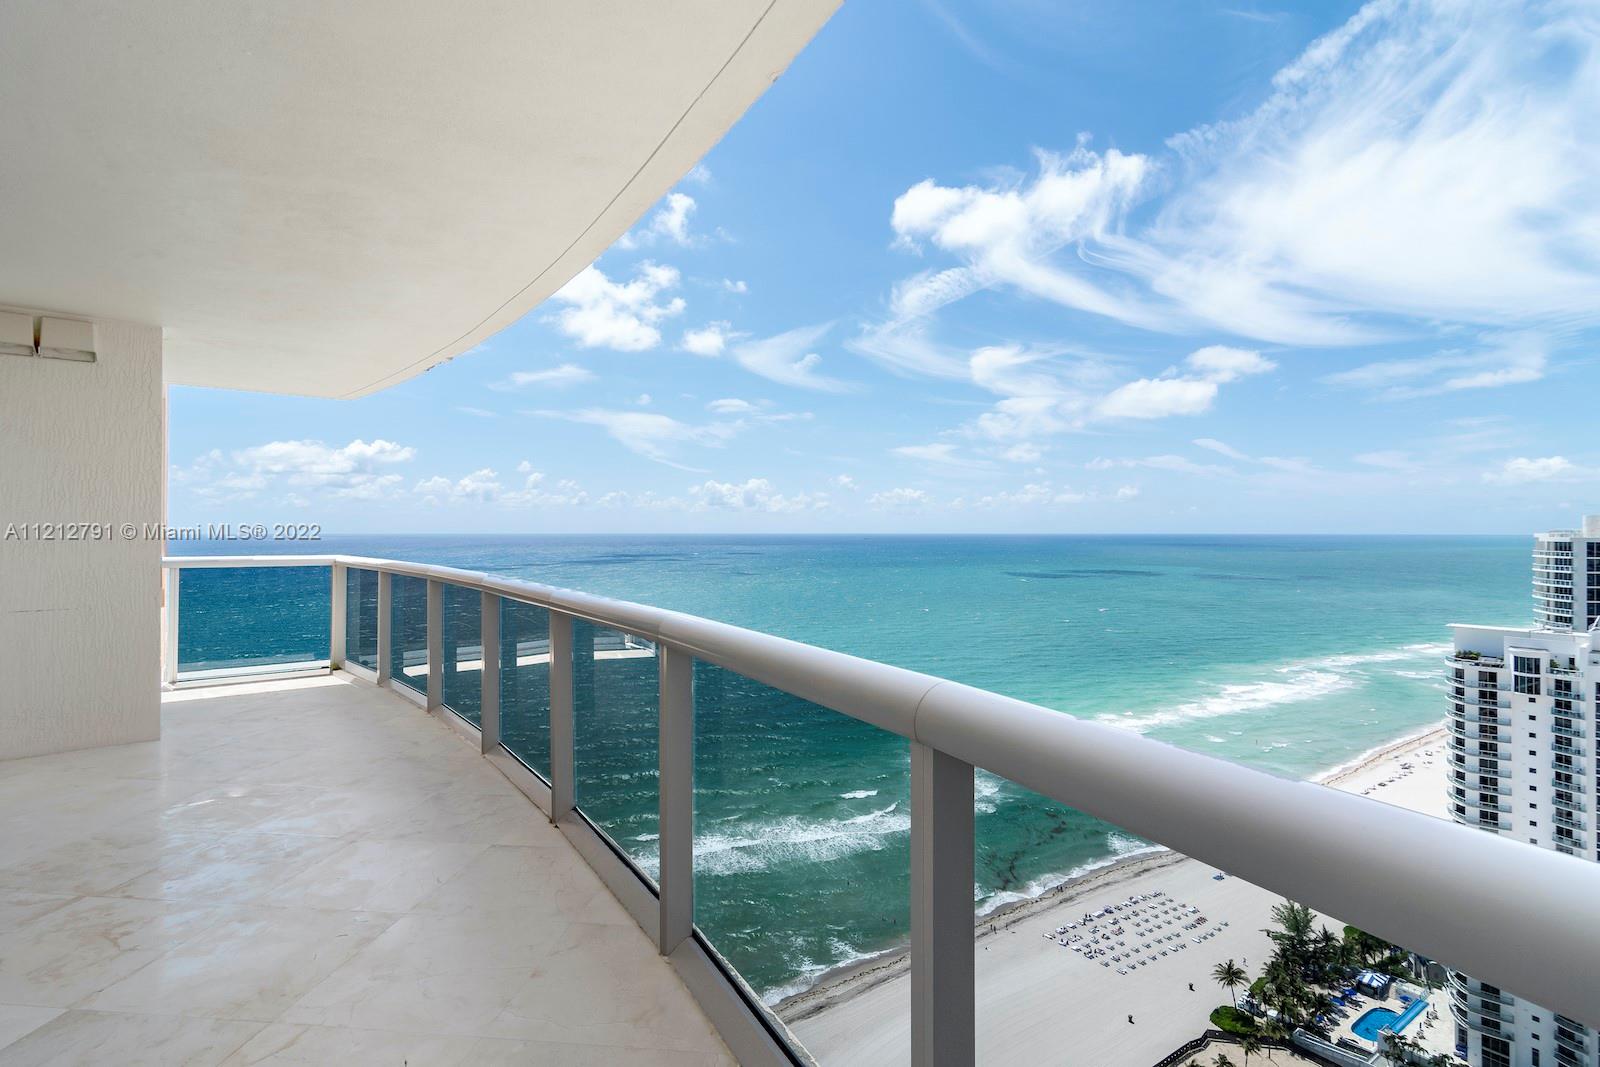 a view of balcony with ocean view